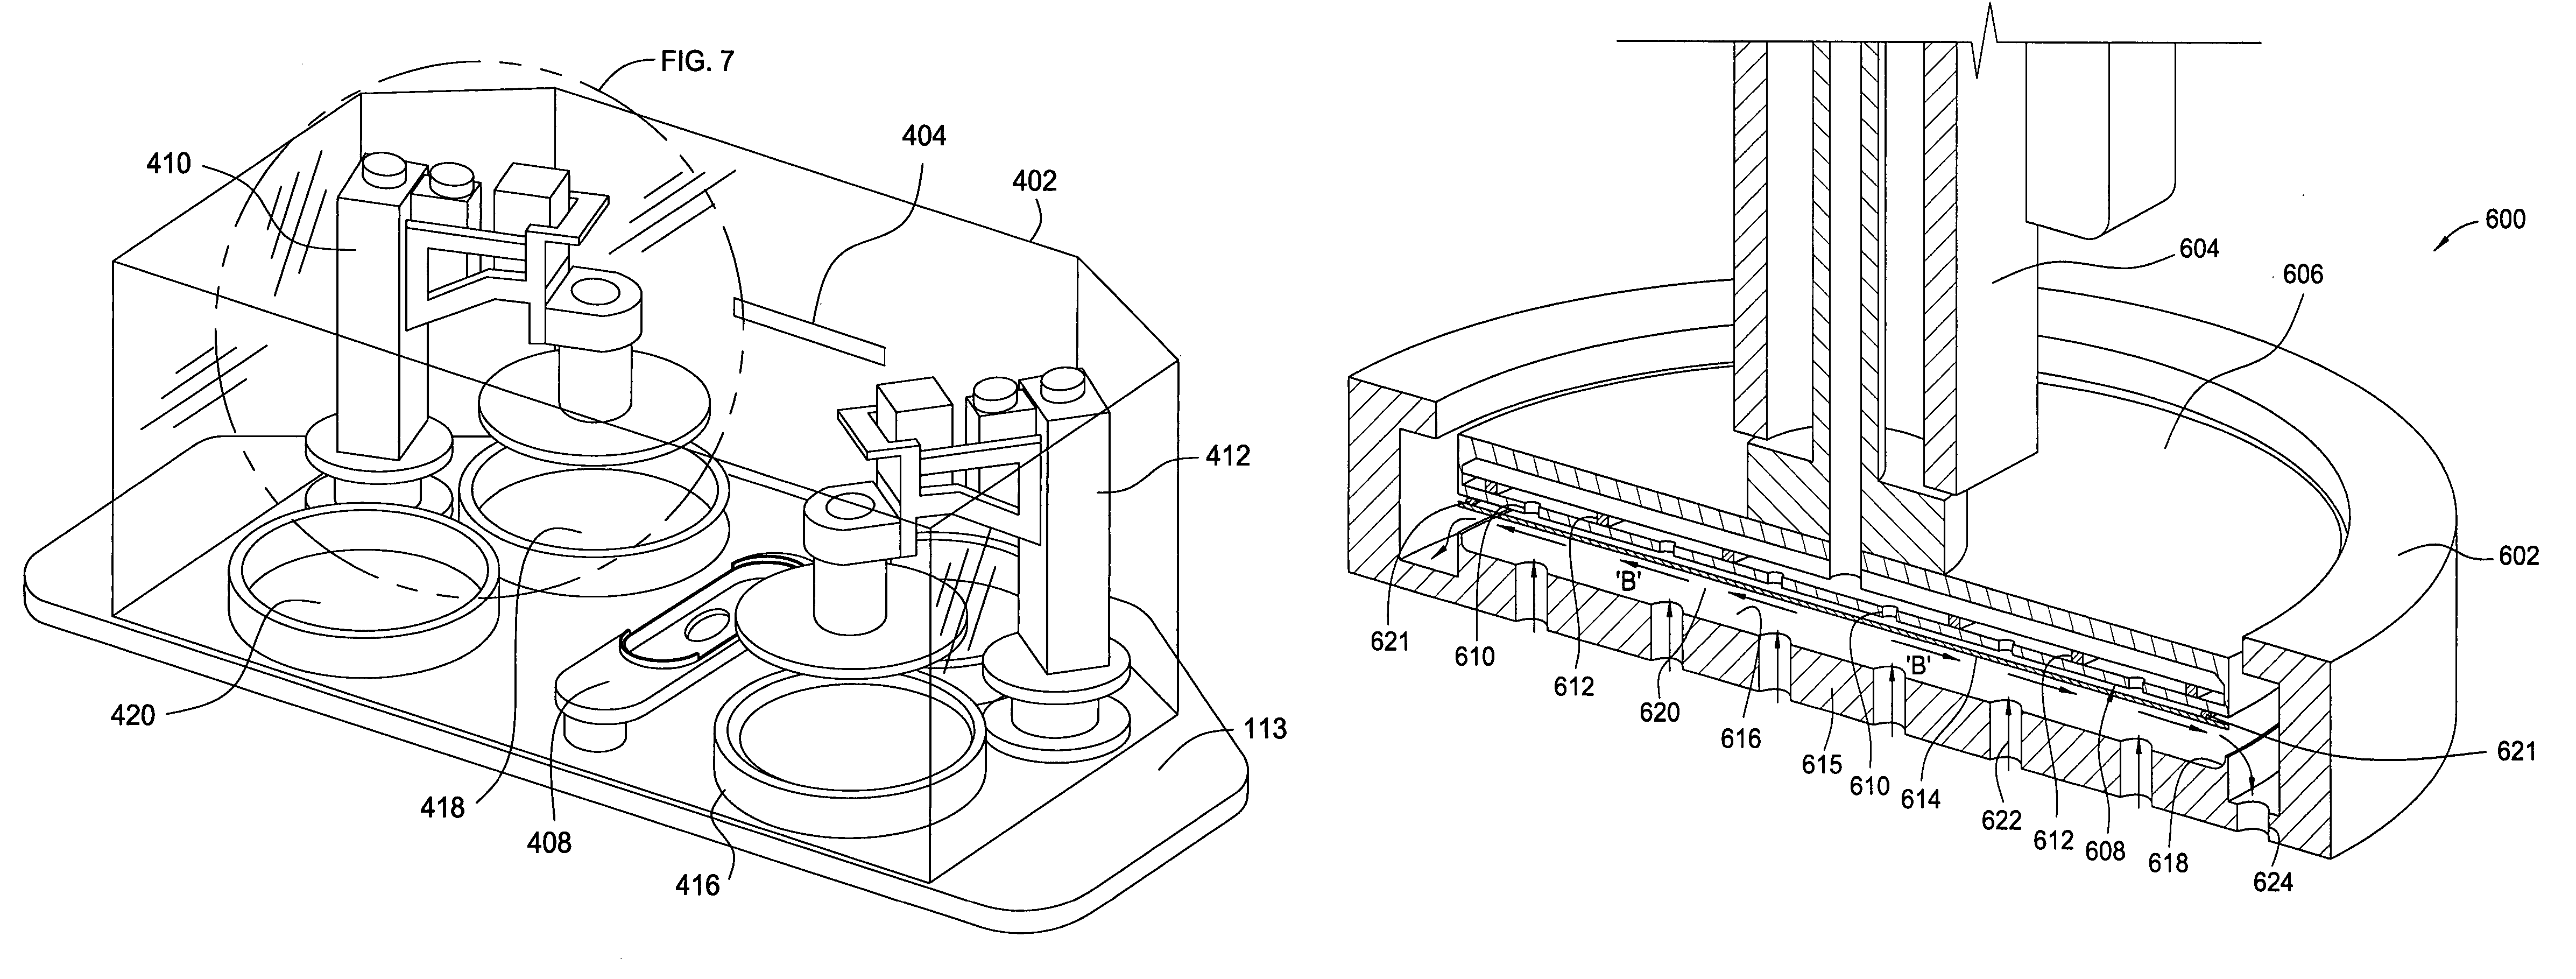 Apparatus for electroless deposition